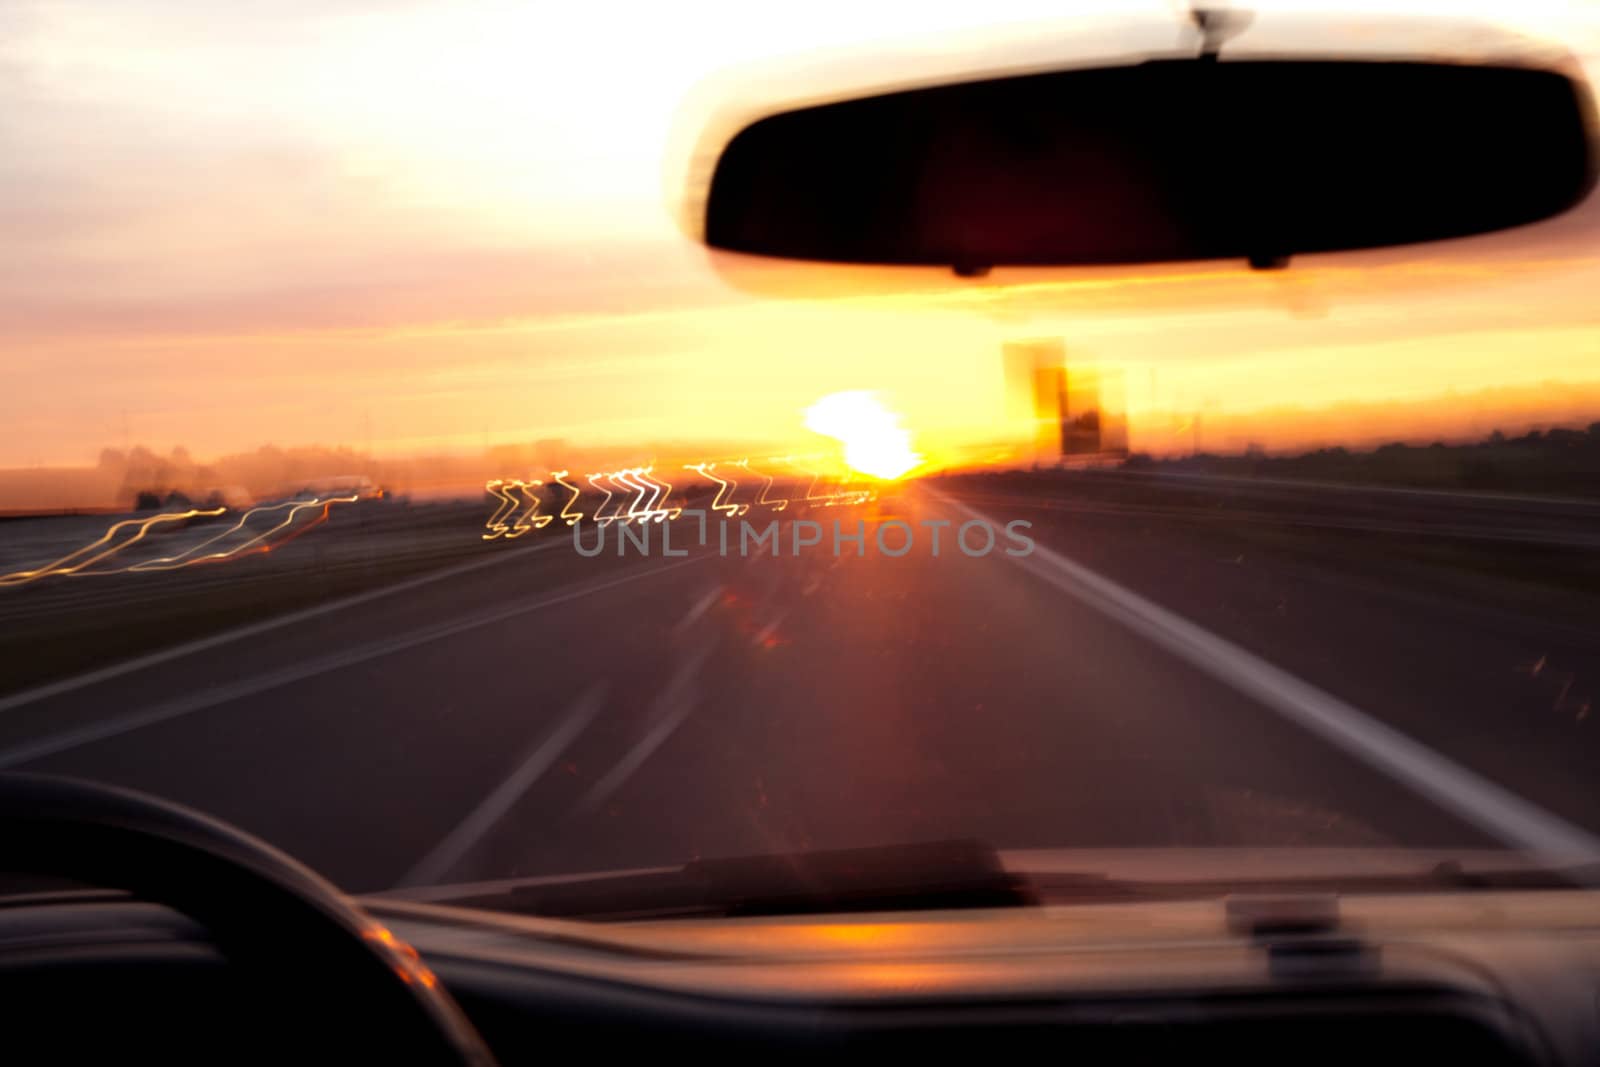 View from a driver's seat after drinking alcohol